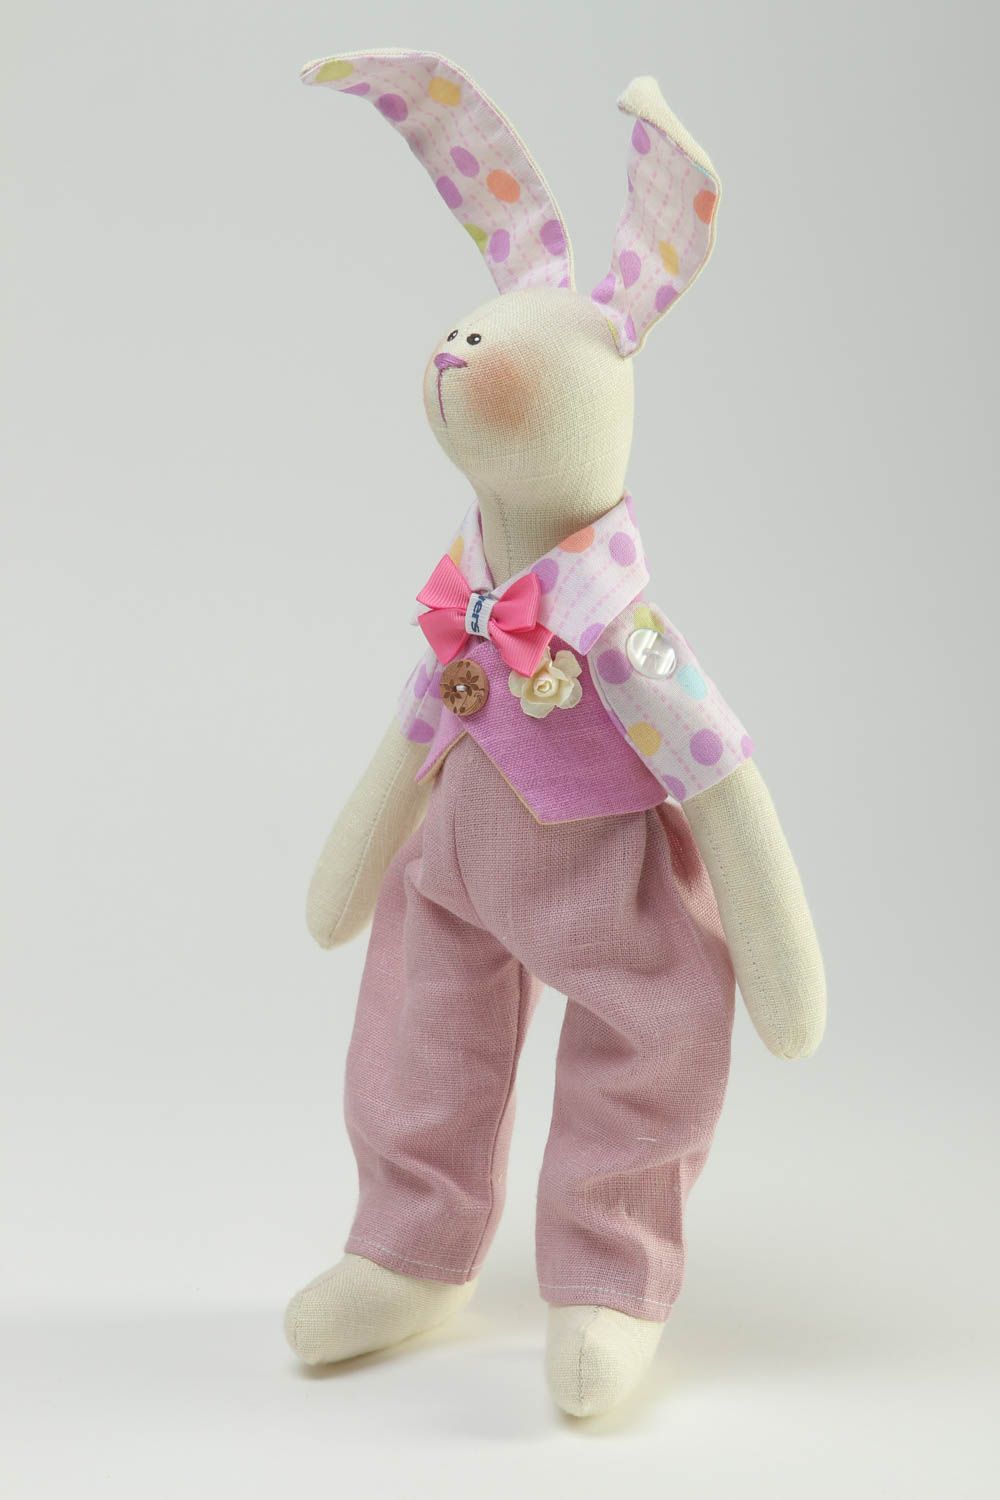 Handmade soft toy cute toy soft bunny toy home decor toys for girls kids toys  photo 2